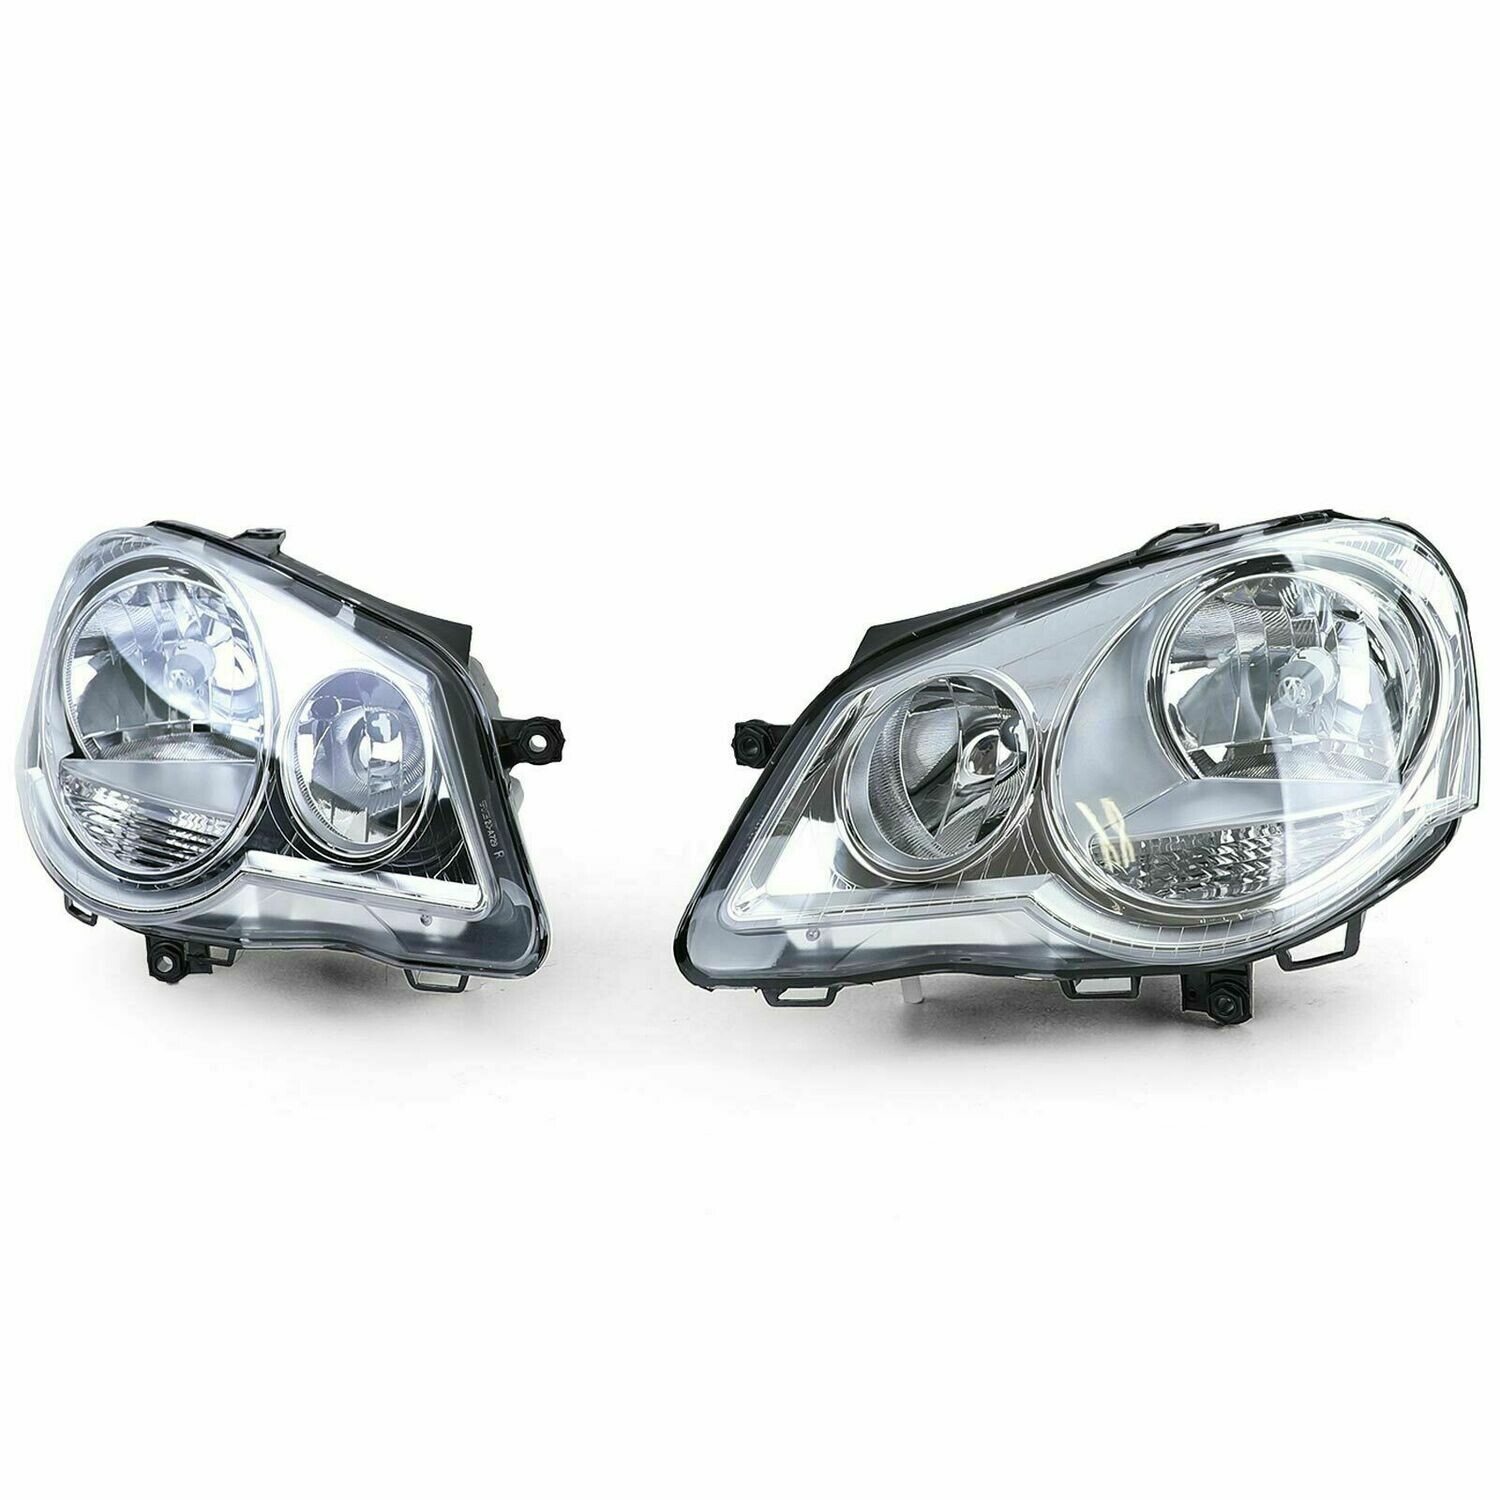 Front Headlights for VW POLO 9N3 05-09 NEW